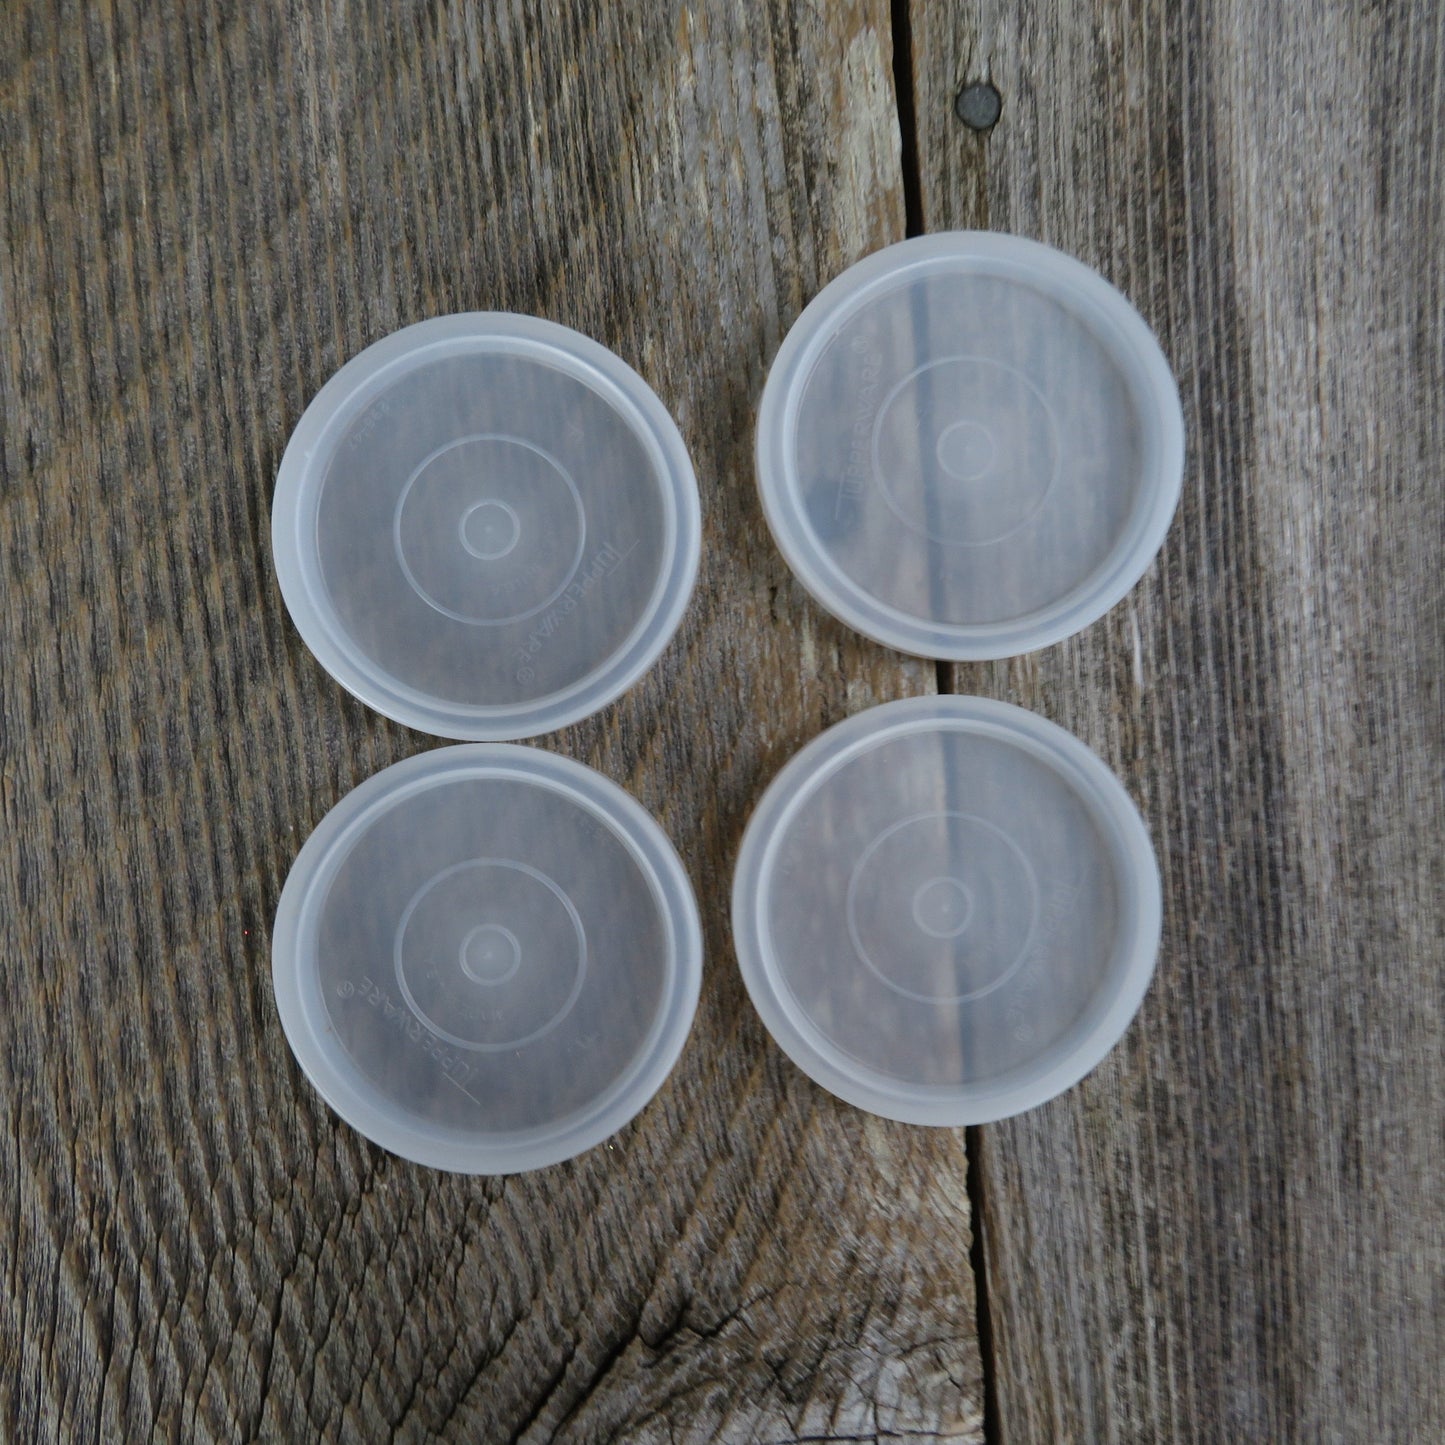 Vintage Tupperware Lid 296 Set of 4 Seal Replacement Fits Tumbler F Cup Plastic Covers 12 and 6 Ounce Drinking Glass White